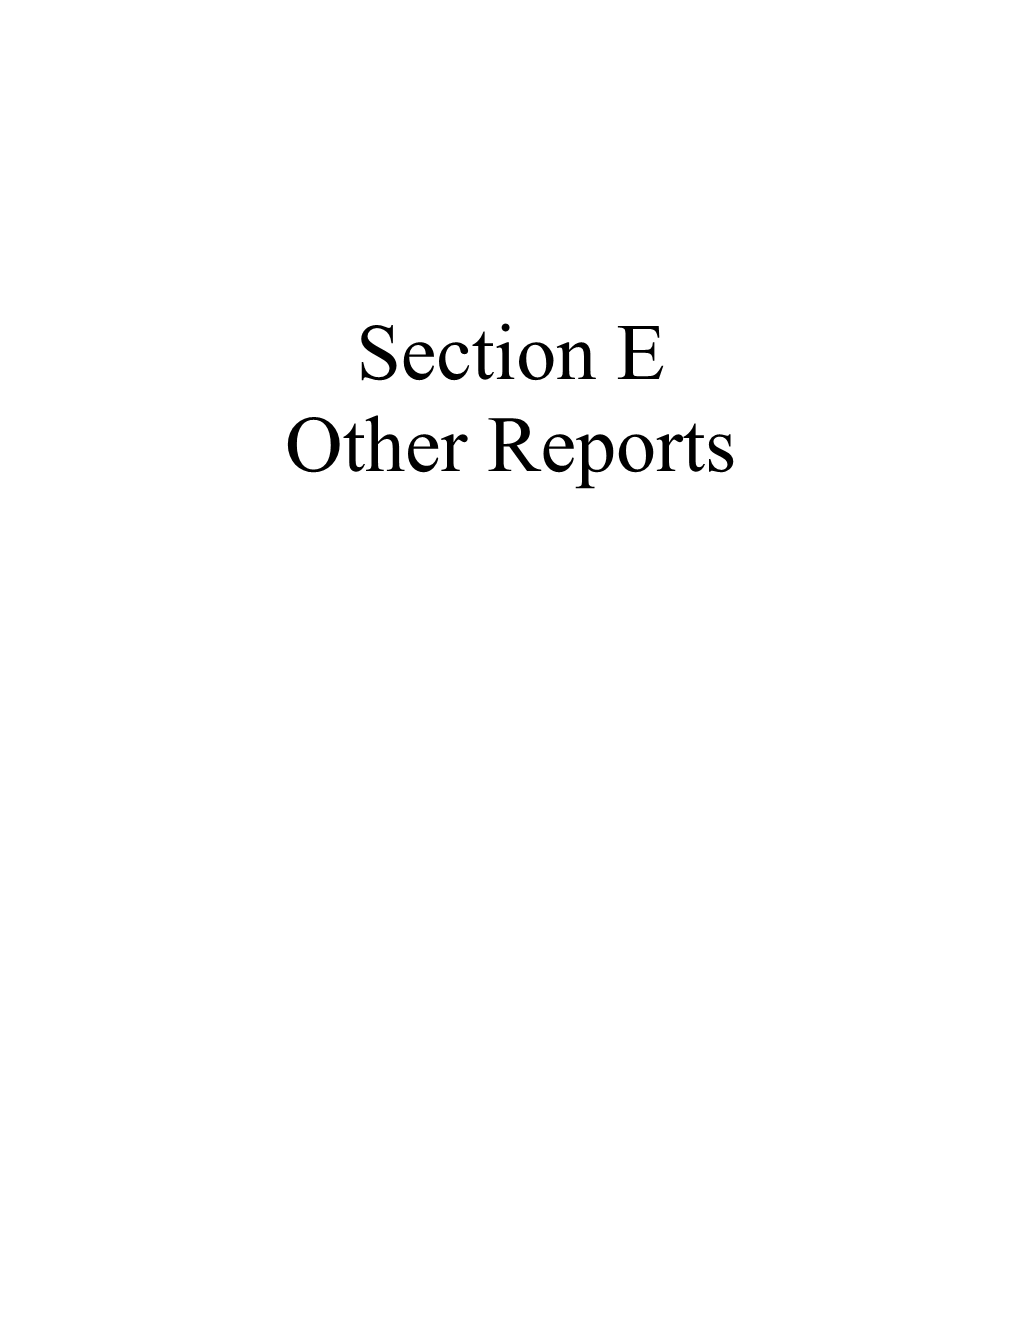 Section E Other Reports